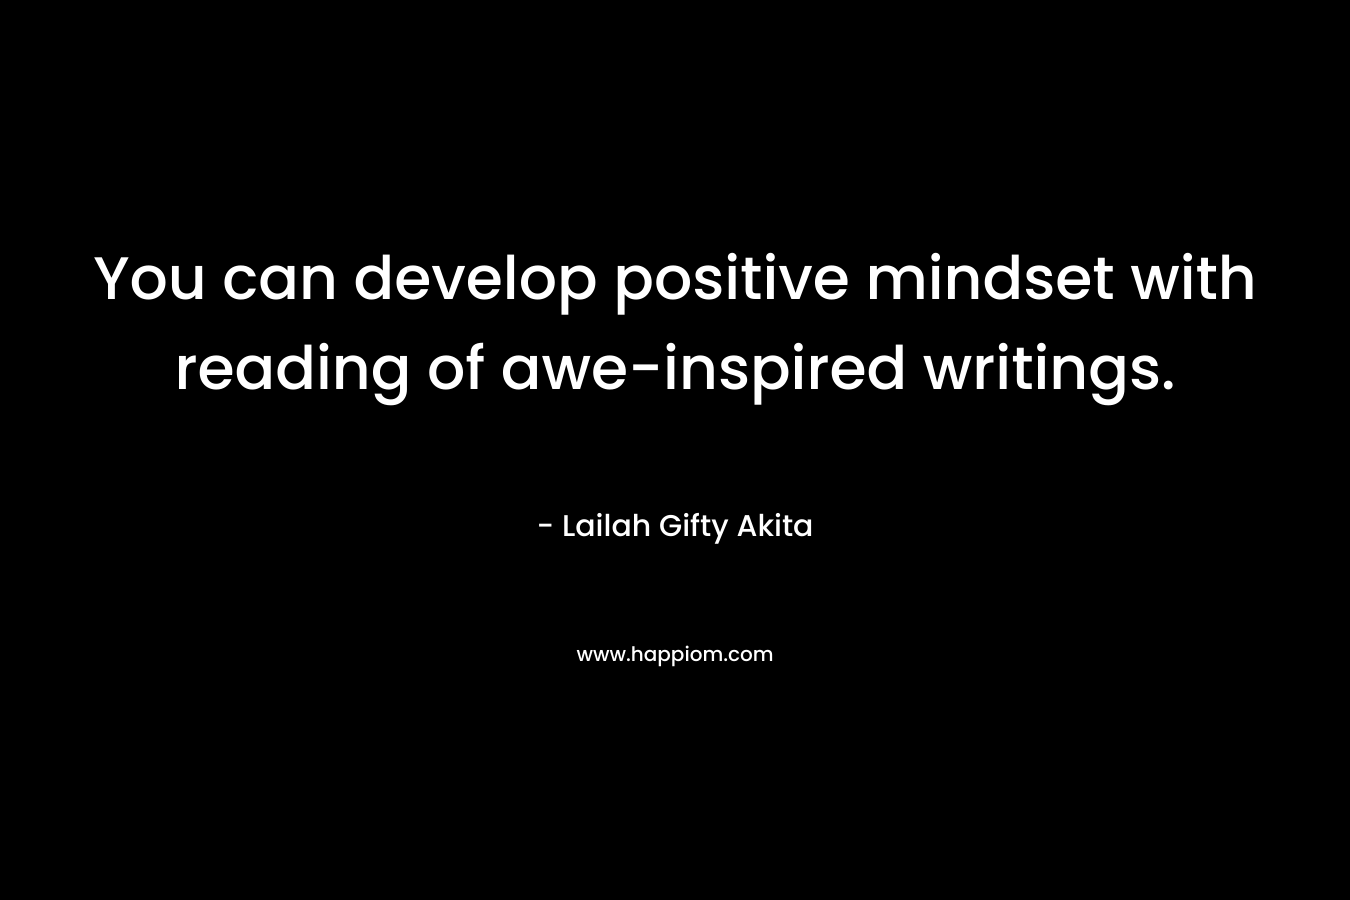 You can develop positive mindset with reading of awe-inspired writings.